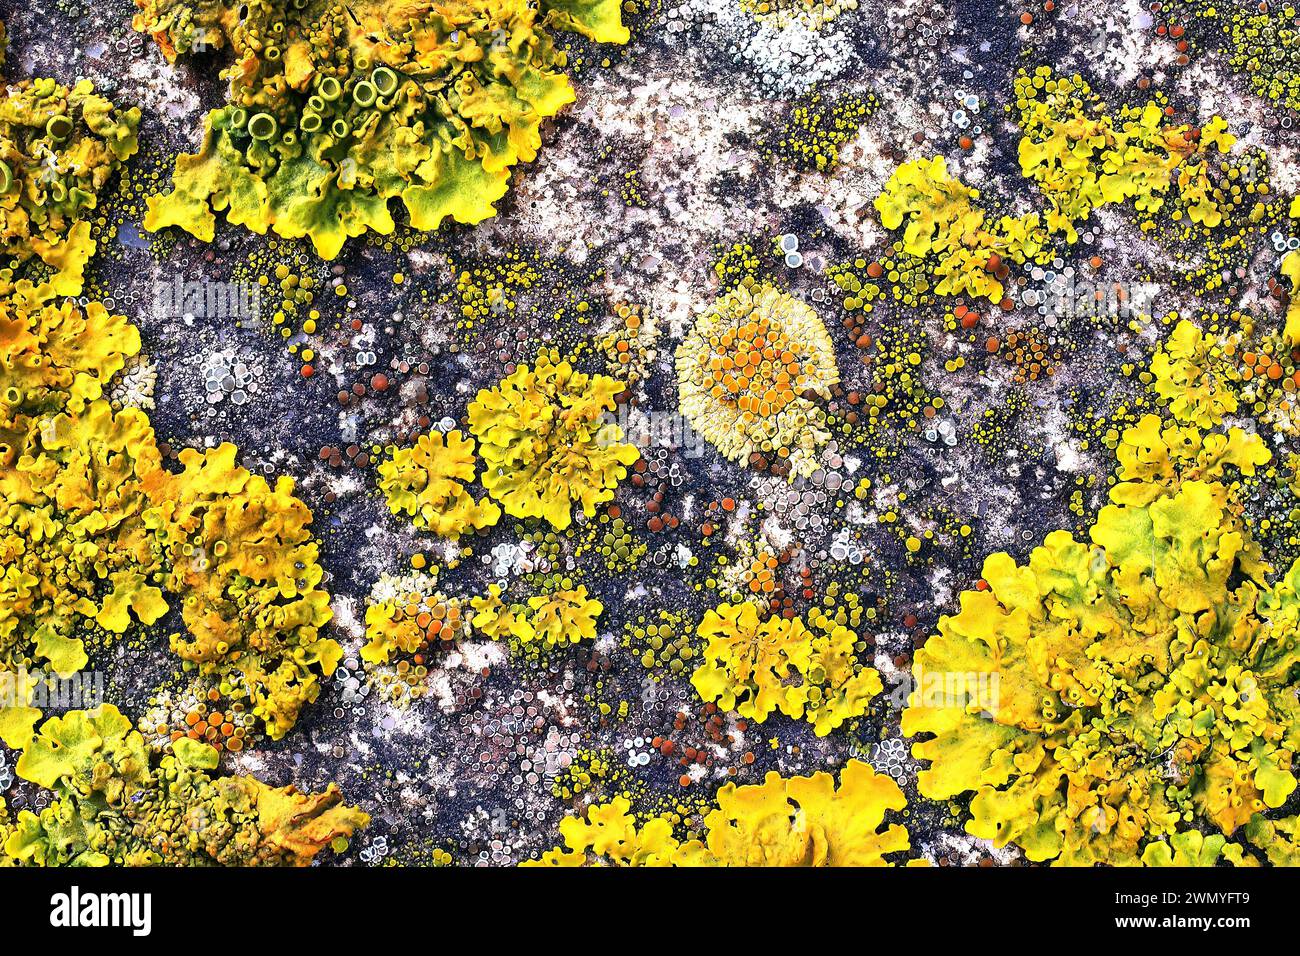 A vibrant assortment of lichen species, showcasing a natural mosaic of textures and colors on a rock surface. Stock Photo